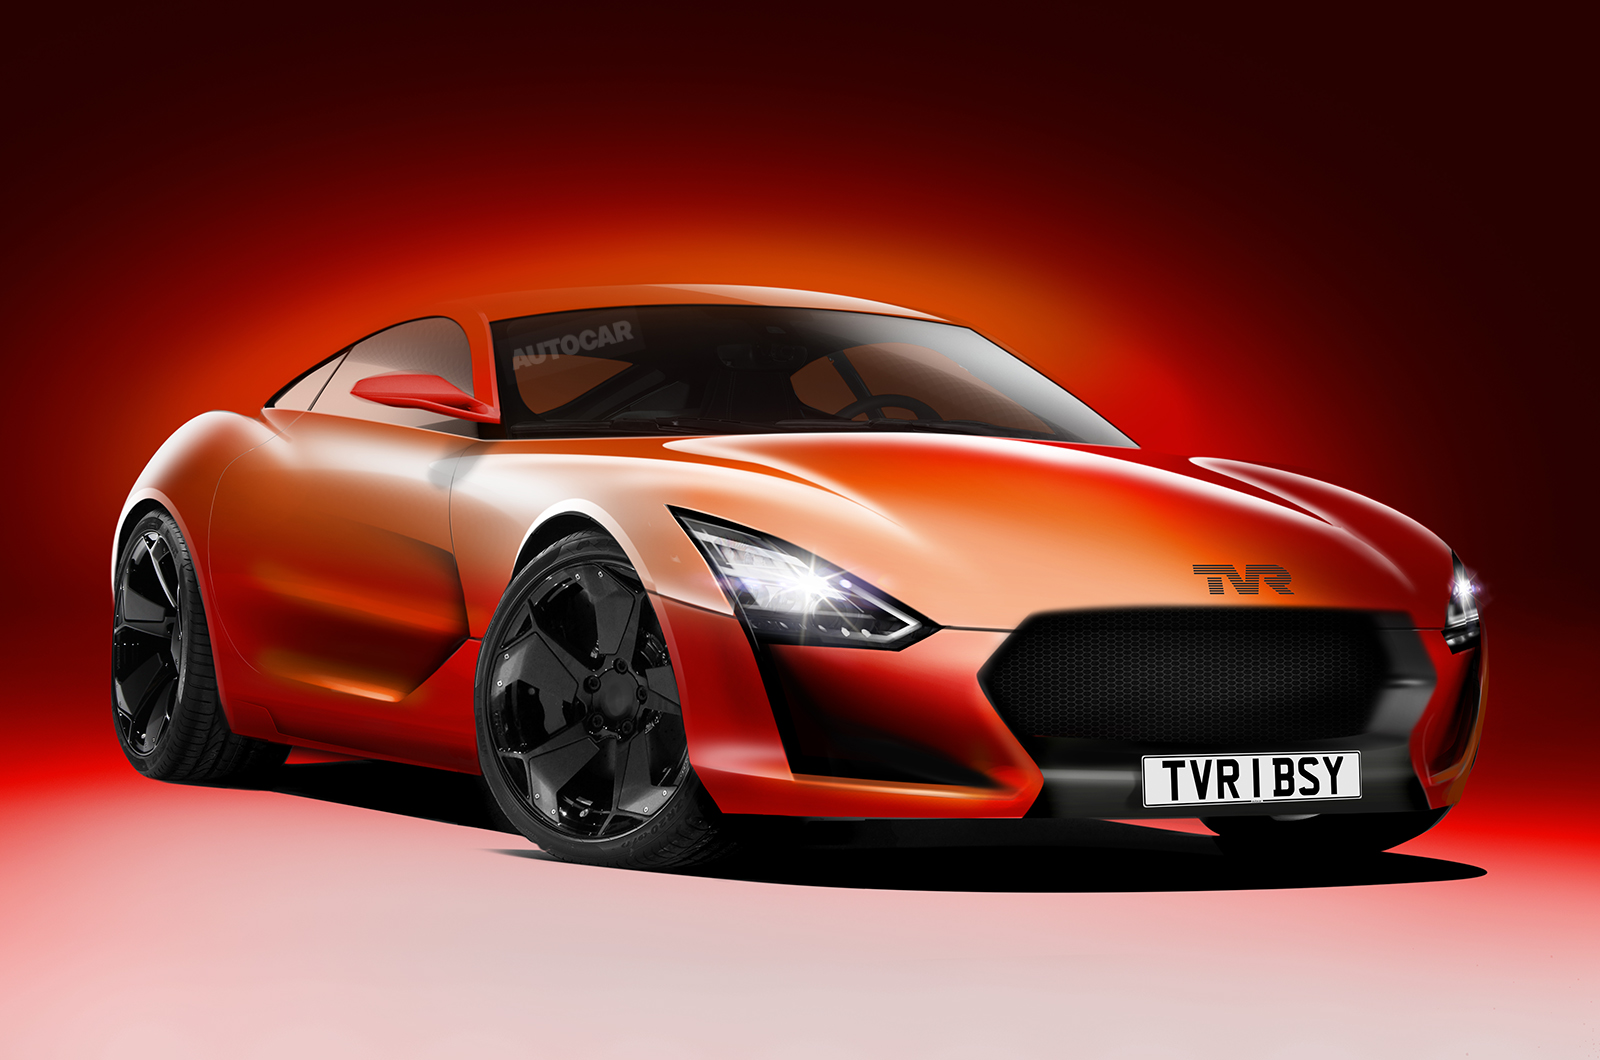 New TVR sports car to use Gordon Murray's iStream Carbon process